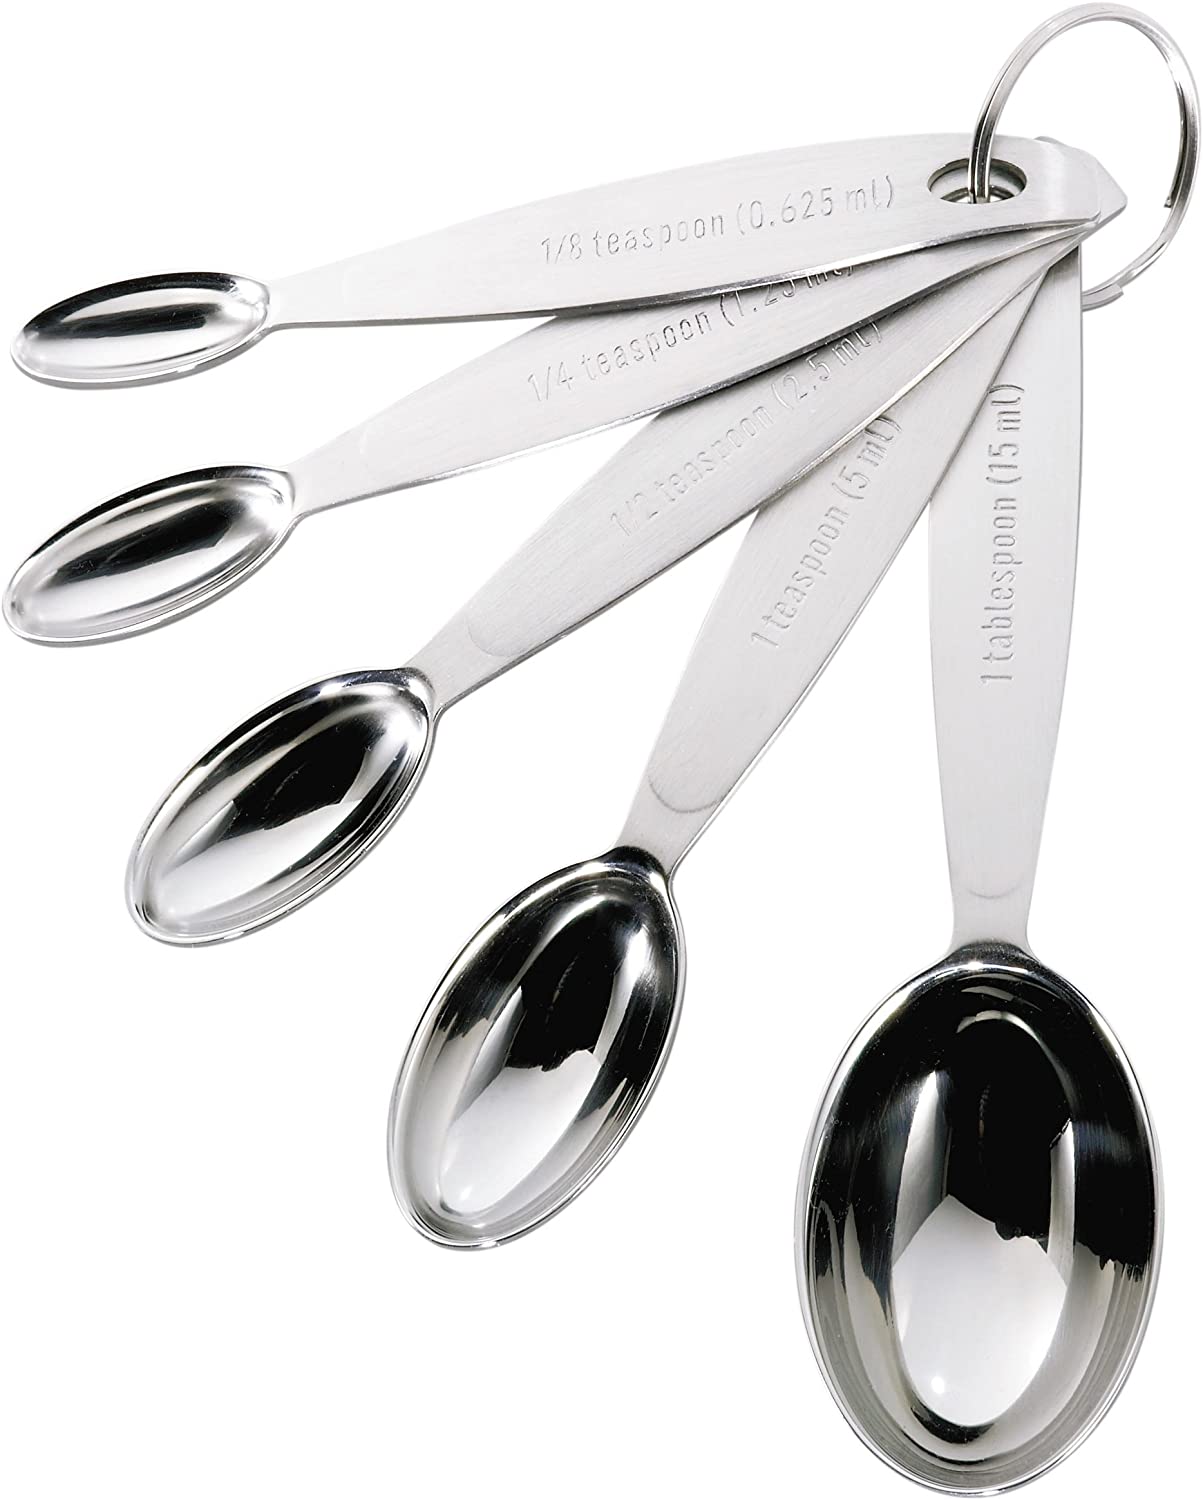 OXO 11180500 Good Grips 8-Piece Magnetic Stainless Steel Measuring